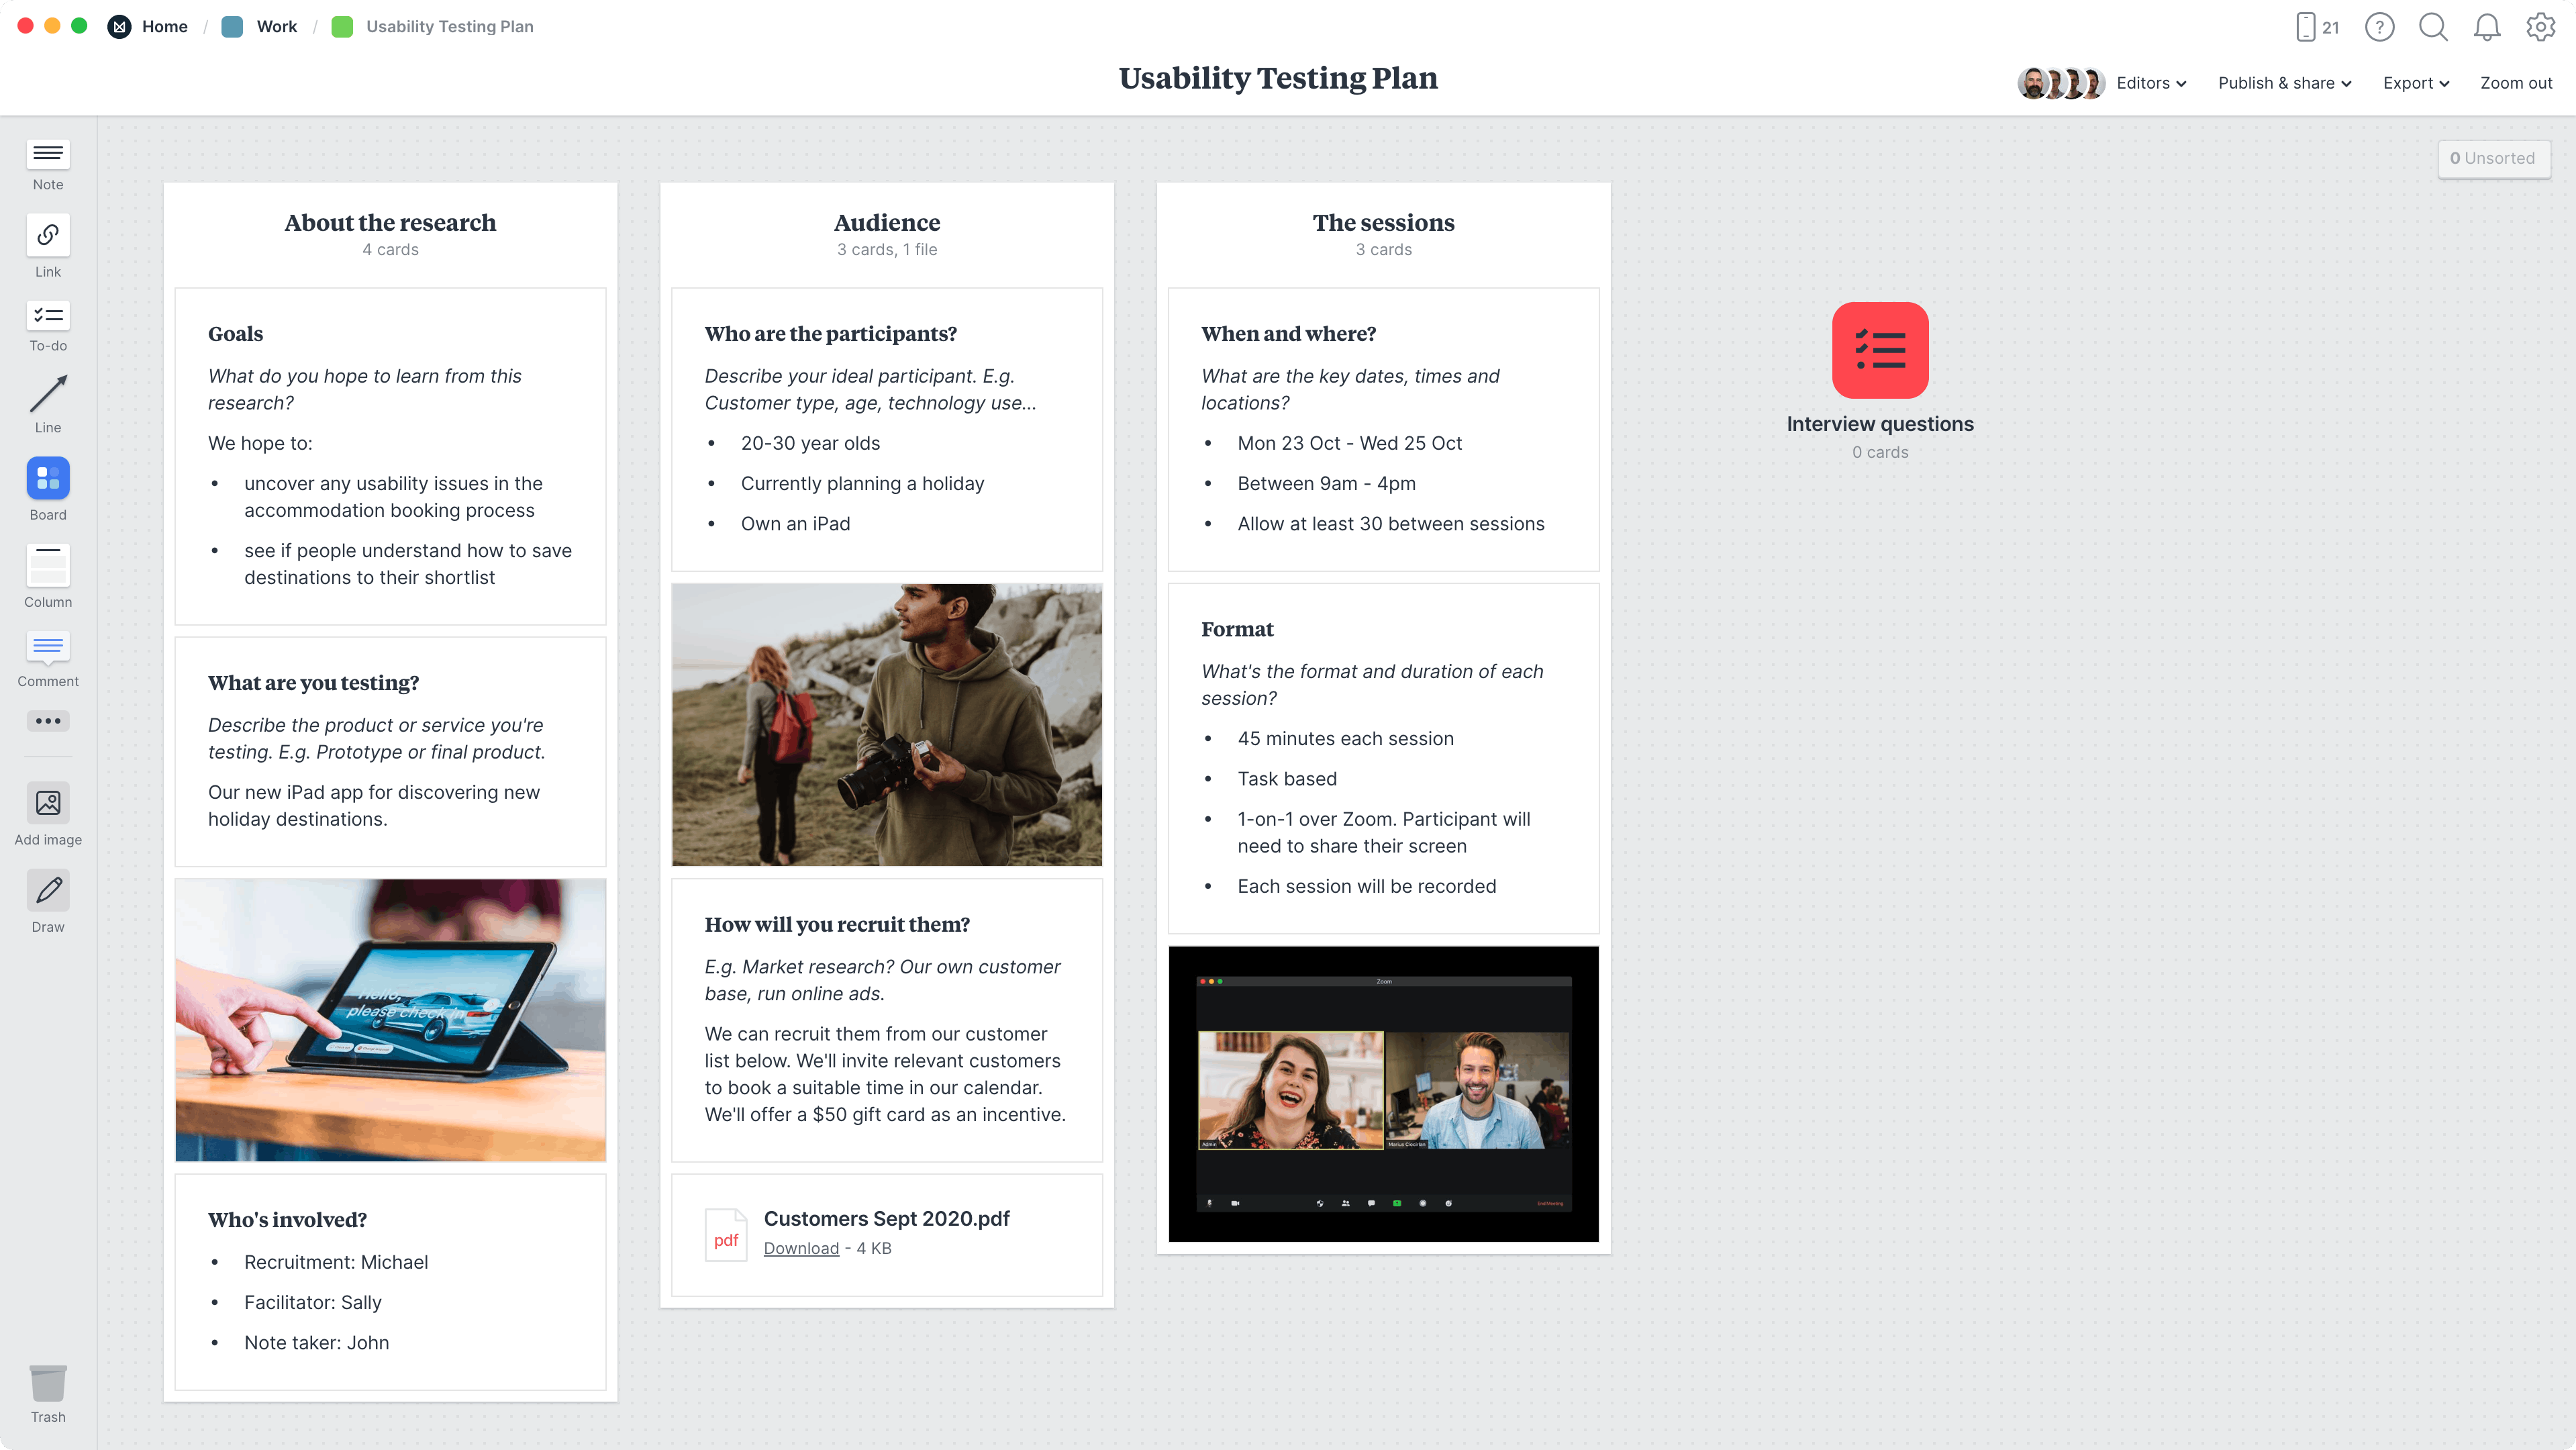 Usability Testing Plan Template, within the Milanote app